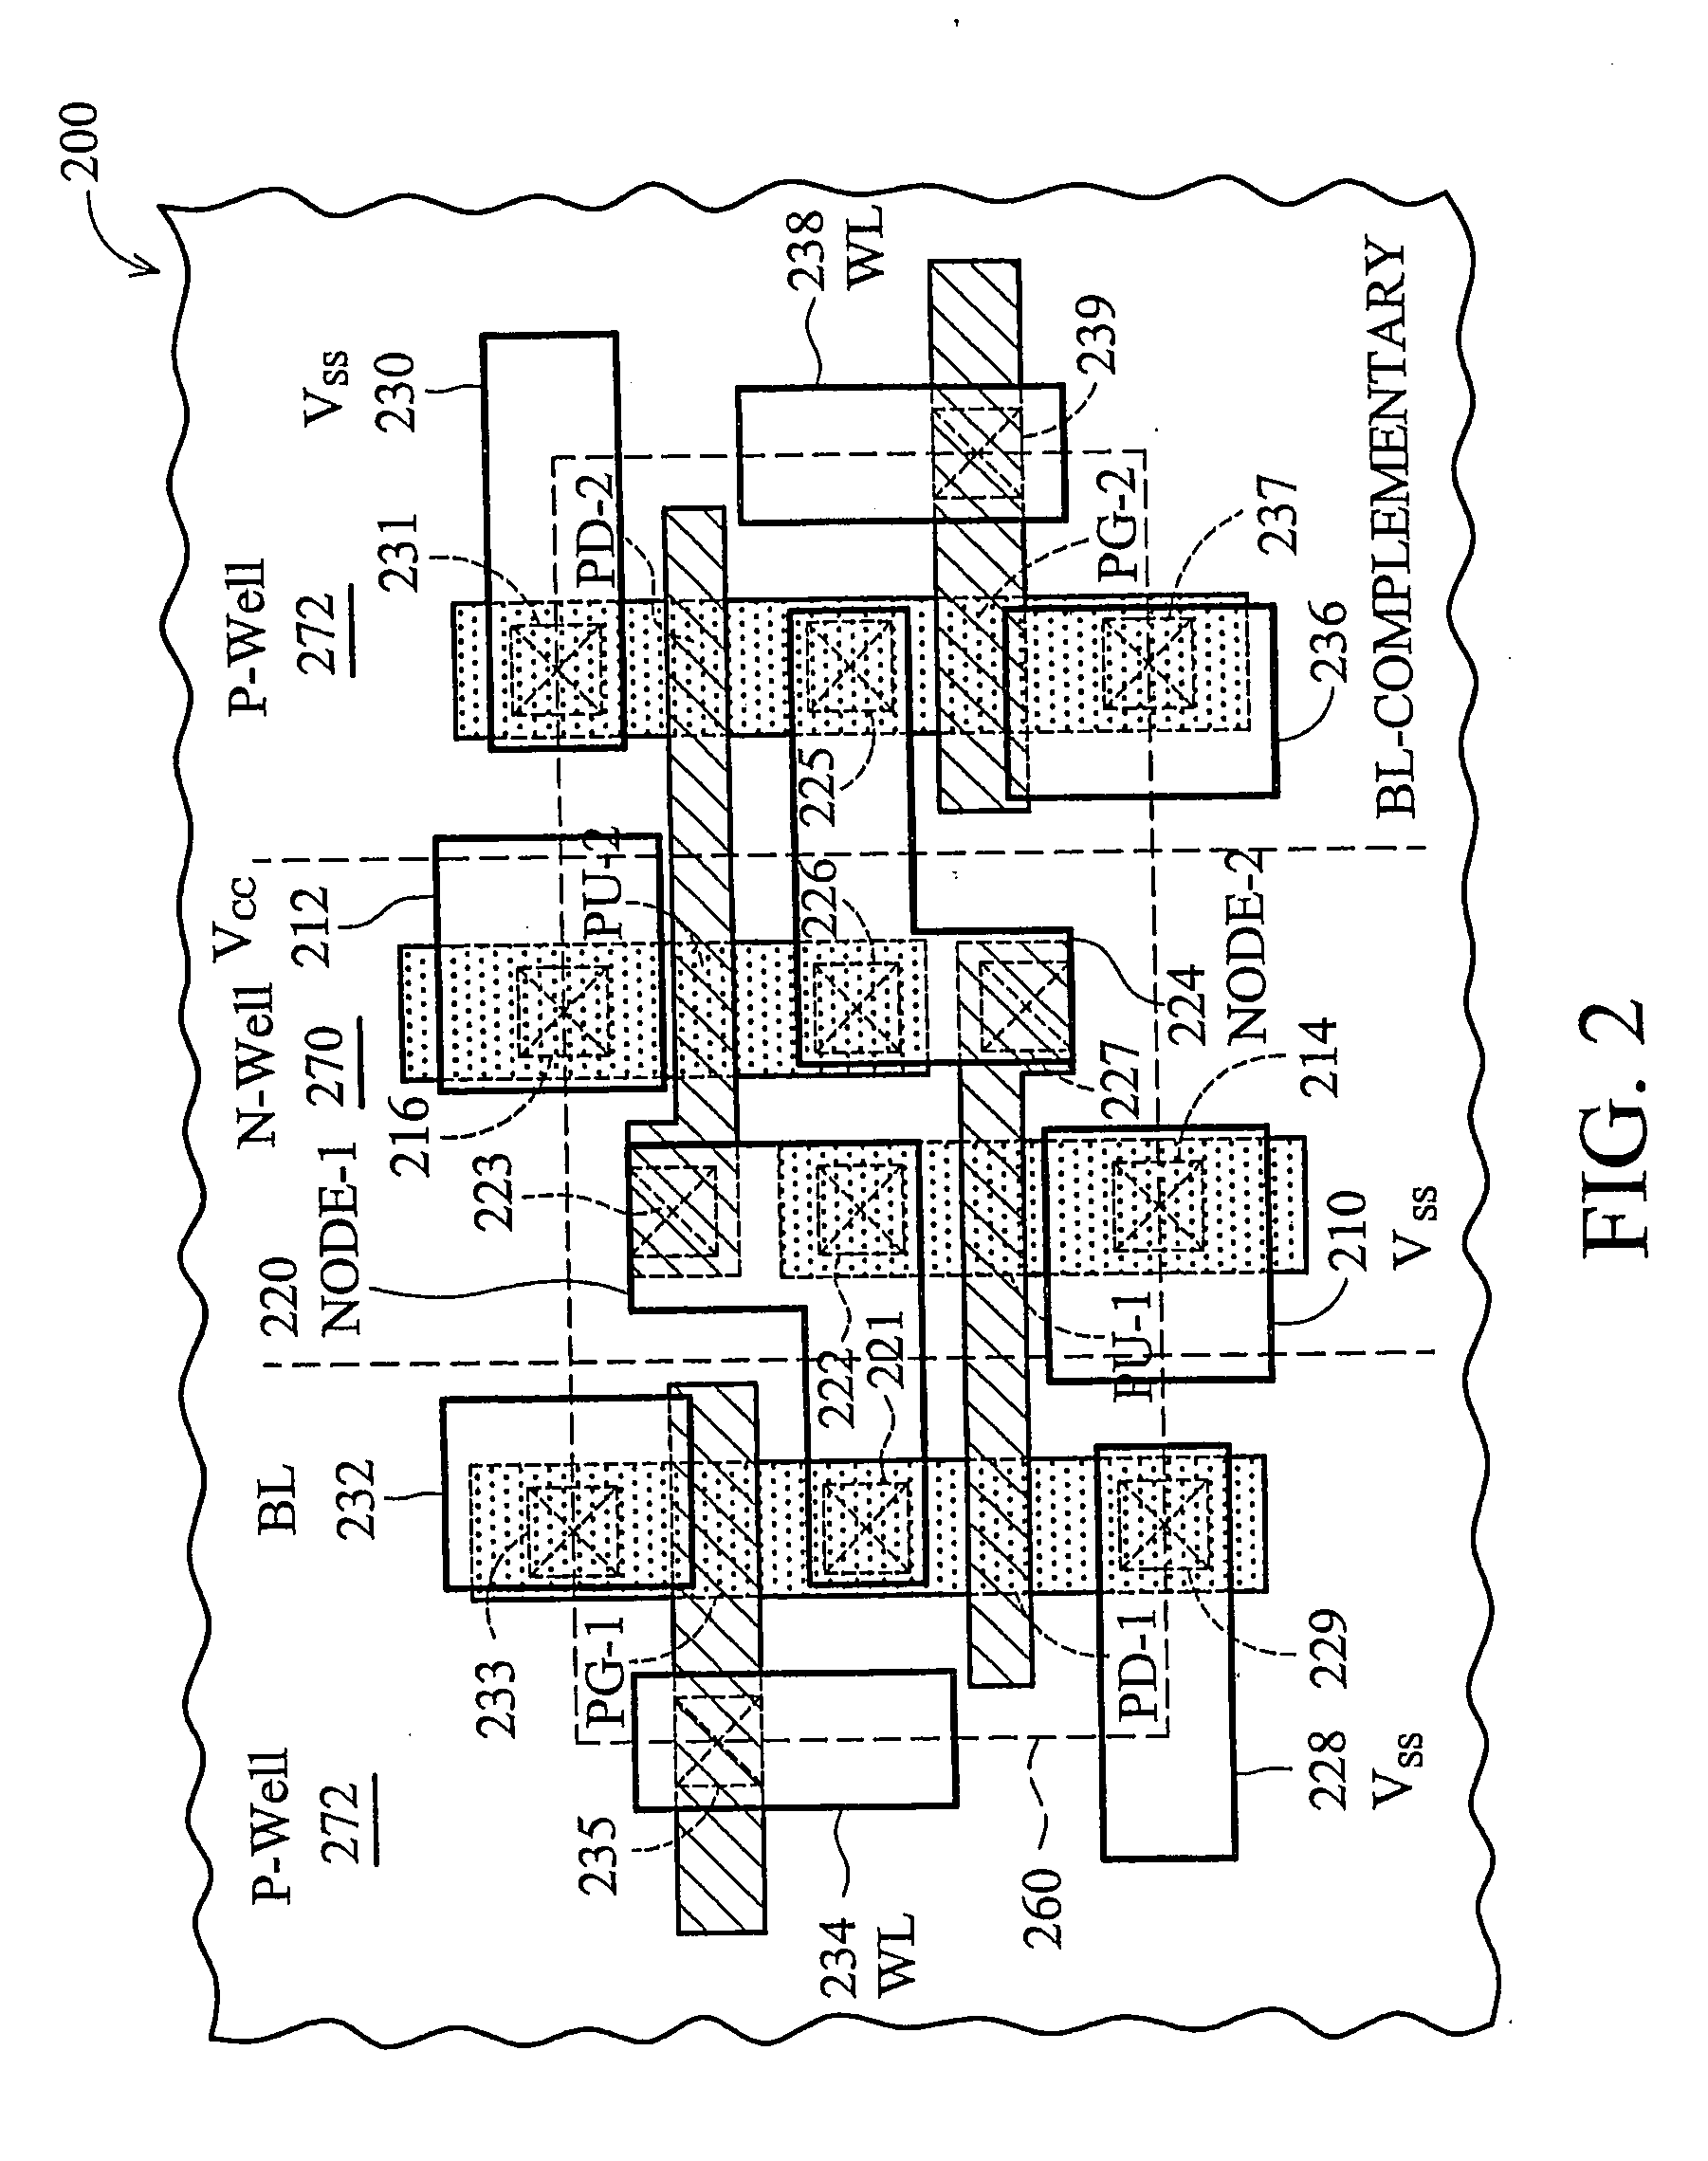 Memory array structure with strapping cells